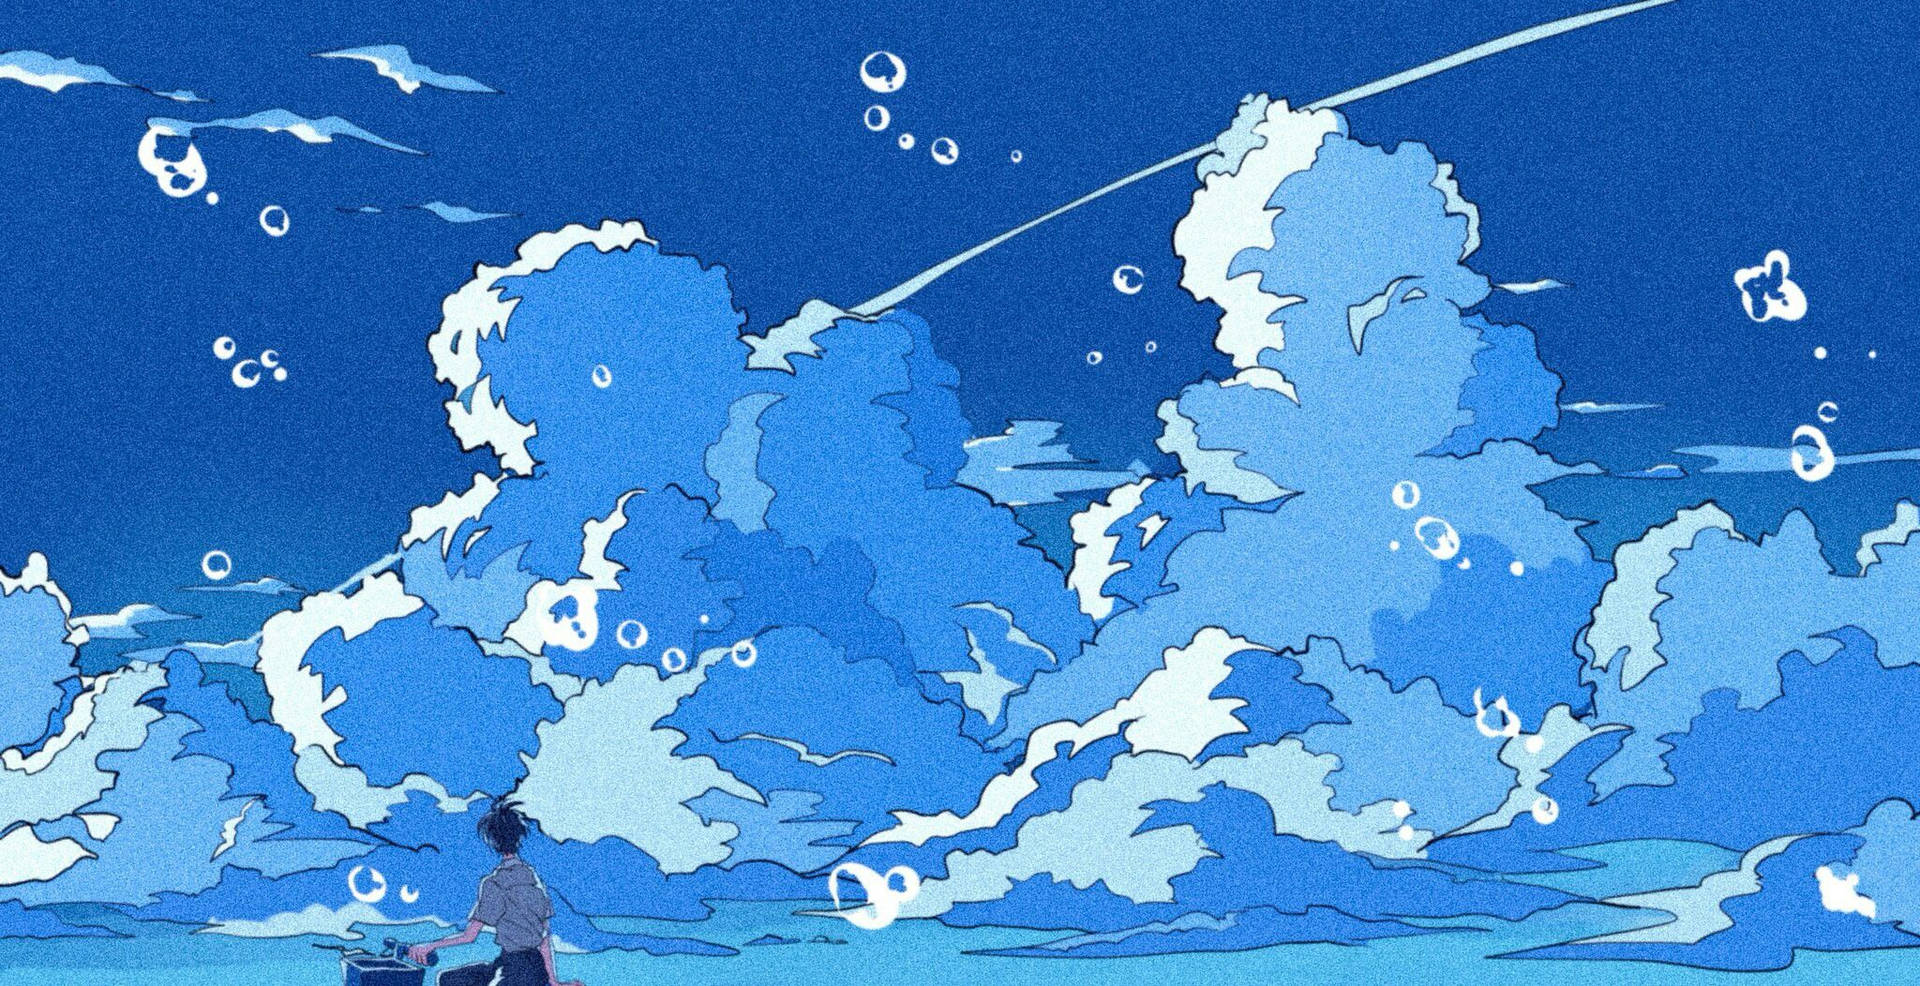 Aesthetic Anime Desktop Bubbles In Clouds Background